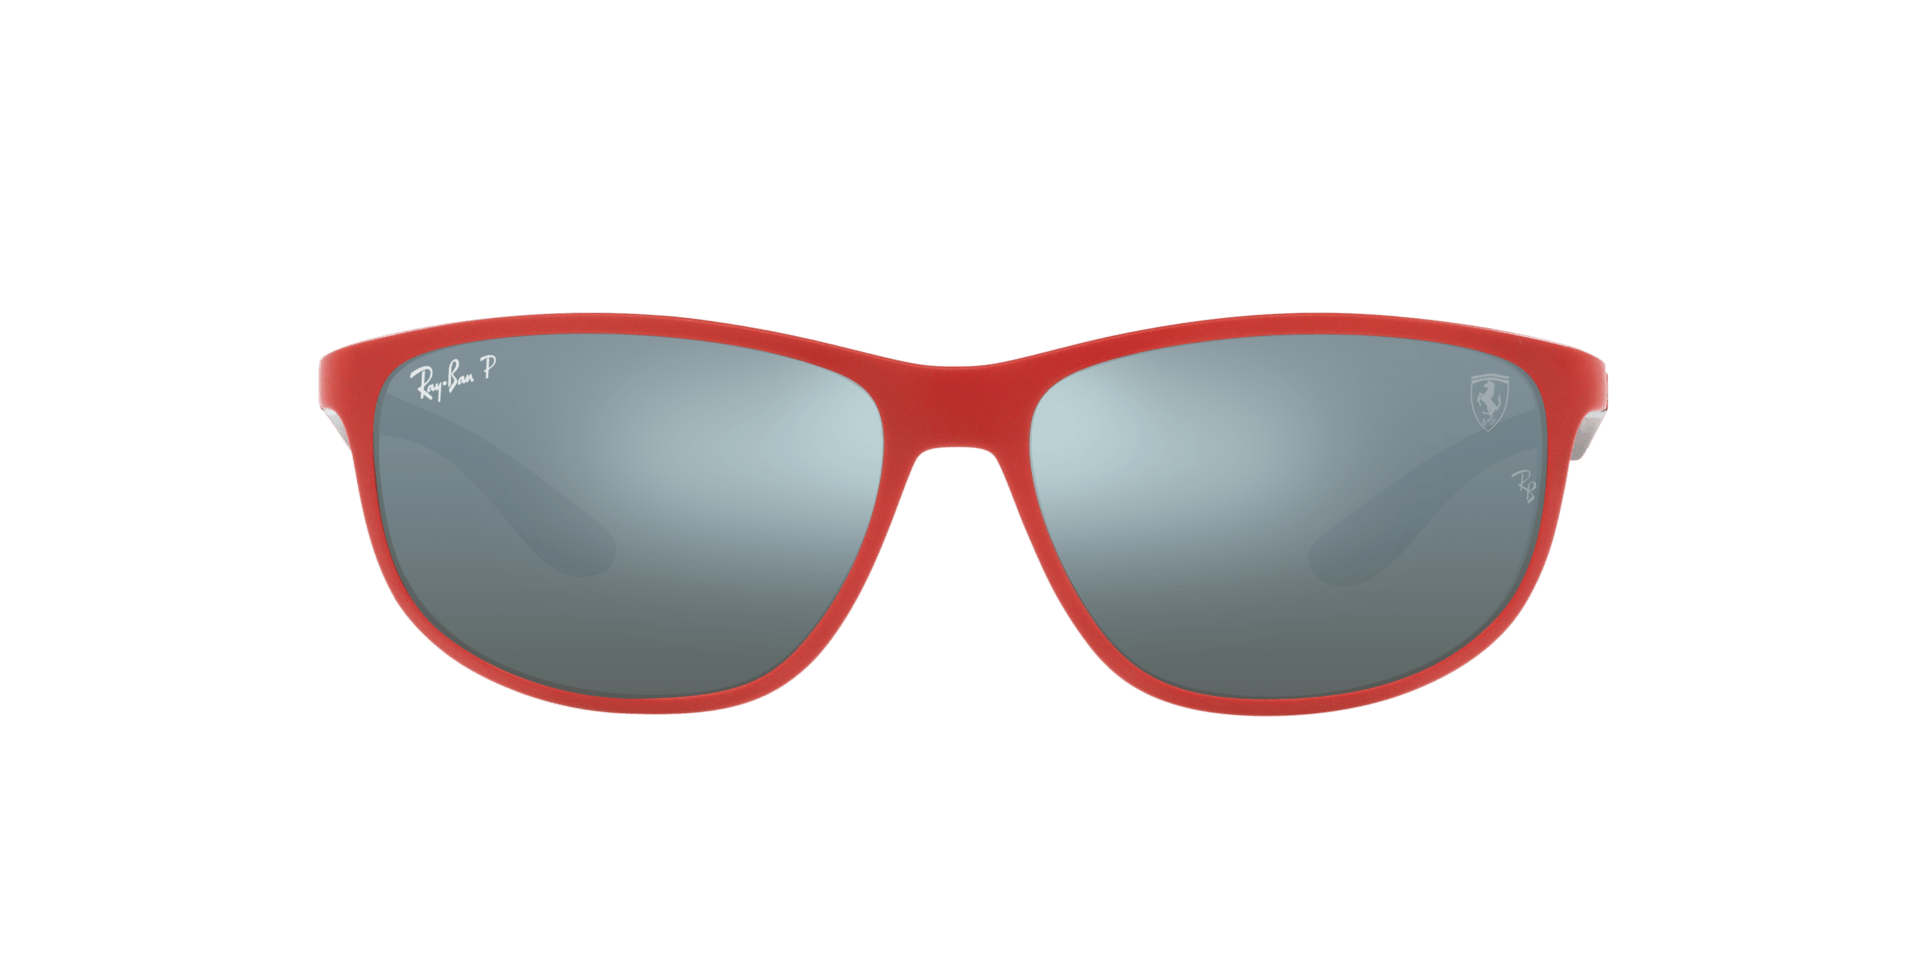 Sunglass Hut in Magrath Road,Bangalore - Best Sunglass Dealers in Bangalore  - Justdial